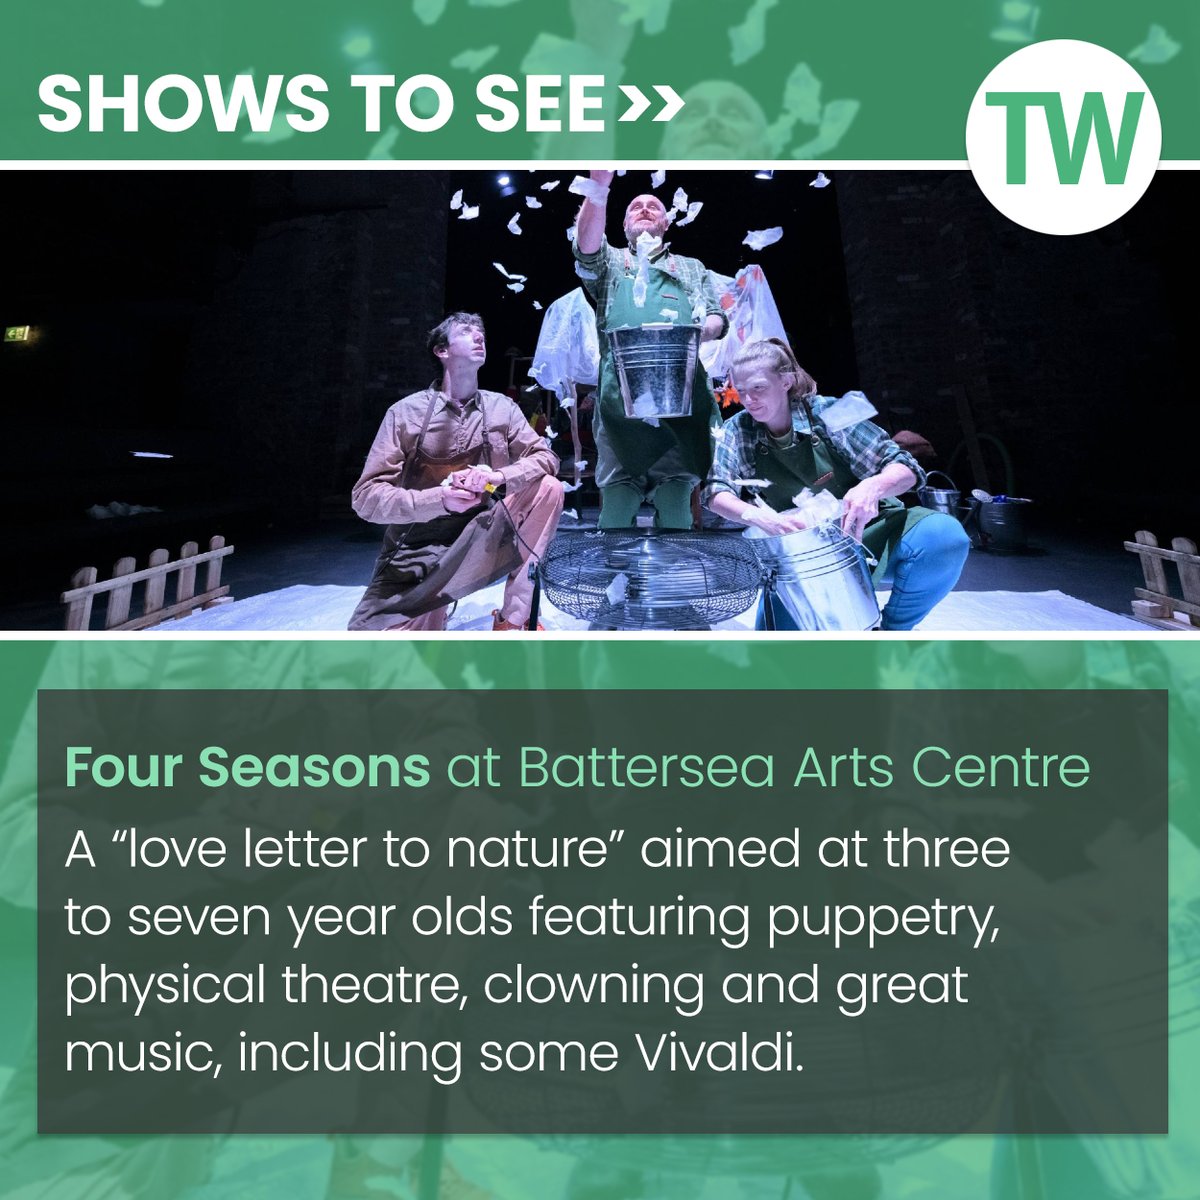 Among our recommended shows to see this week: ‘Four Seasons’ by Little Bulb at Battersea Arts Centre. Get more show tips here: bit.ly/3xeLRZ7 @battersea_arts @Little_Bulb